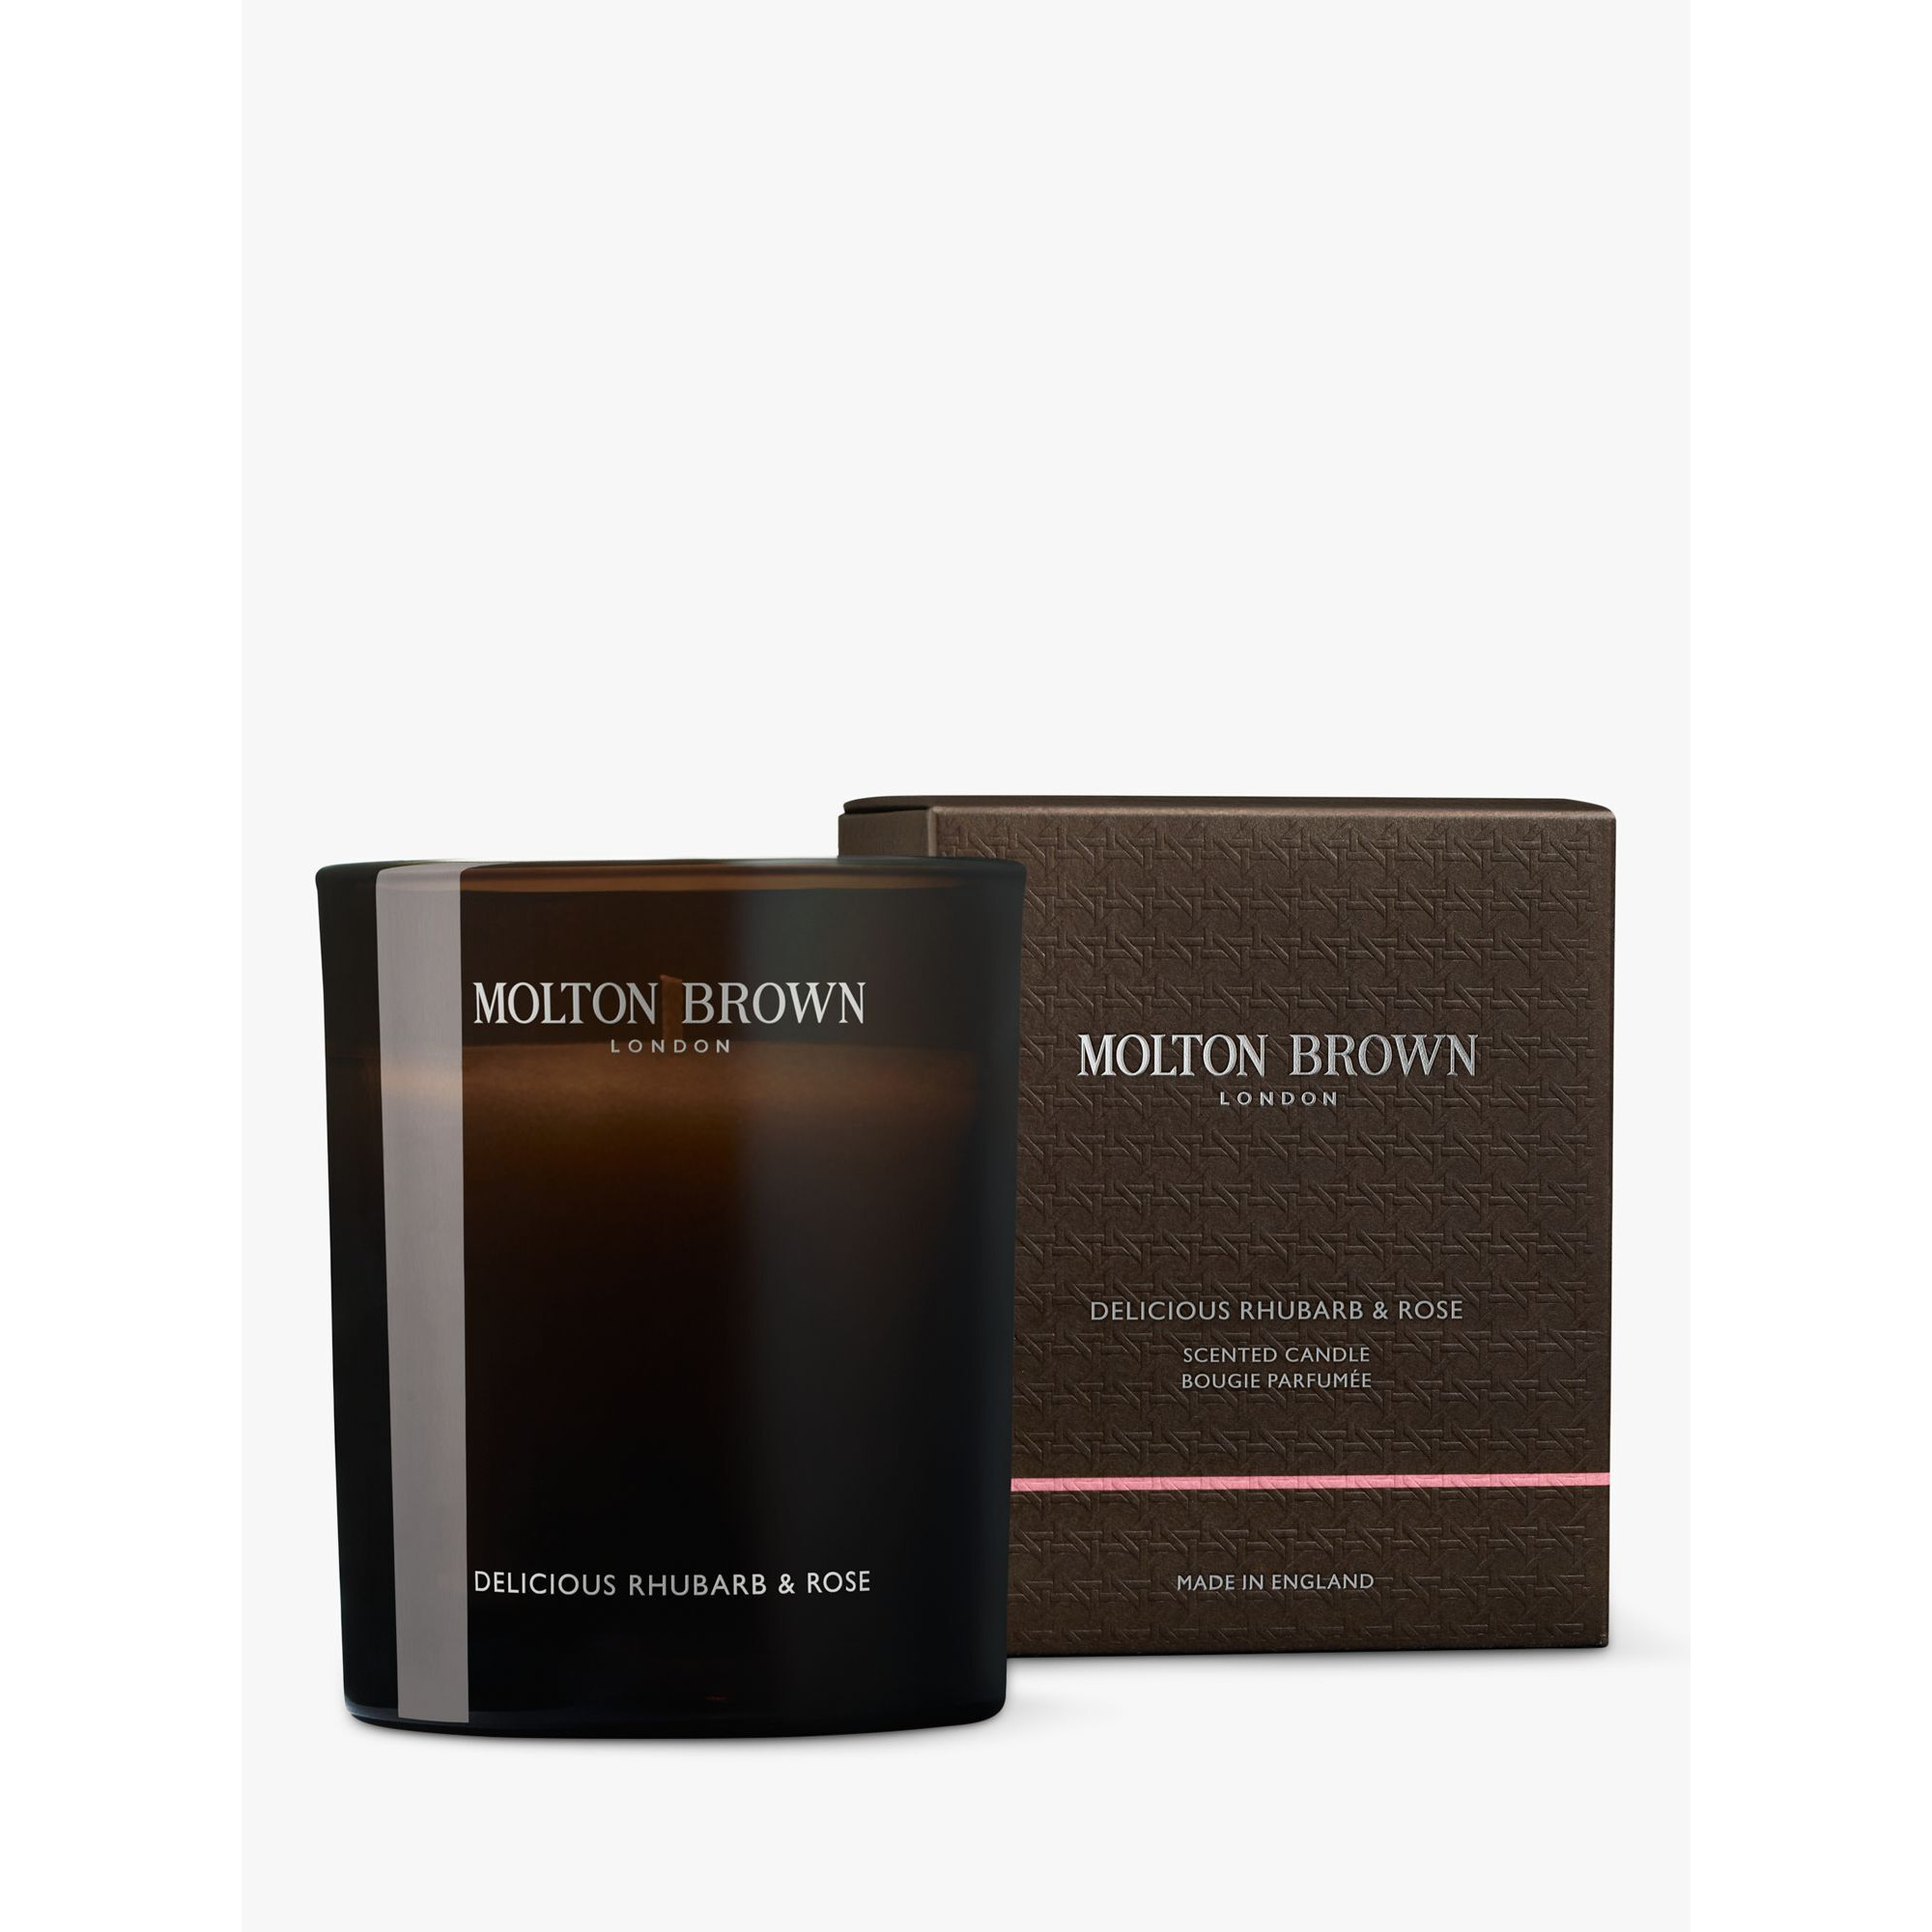 Molton Brown Delicious Rhubarb & Rose Scented Signature Candle, 190g - image 1